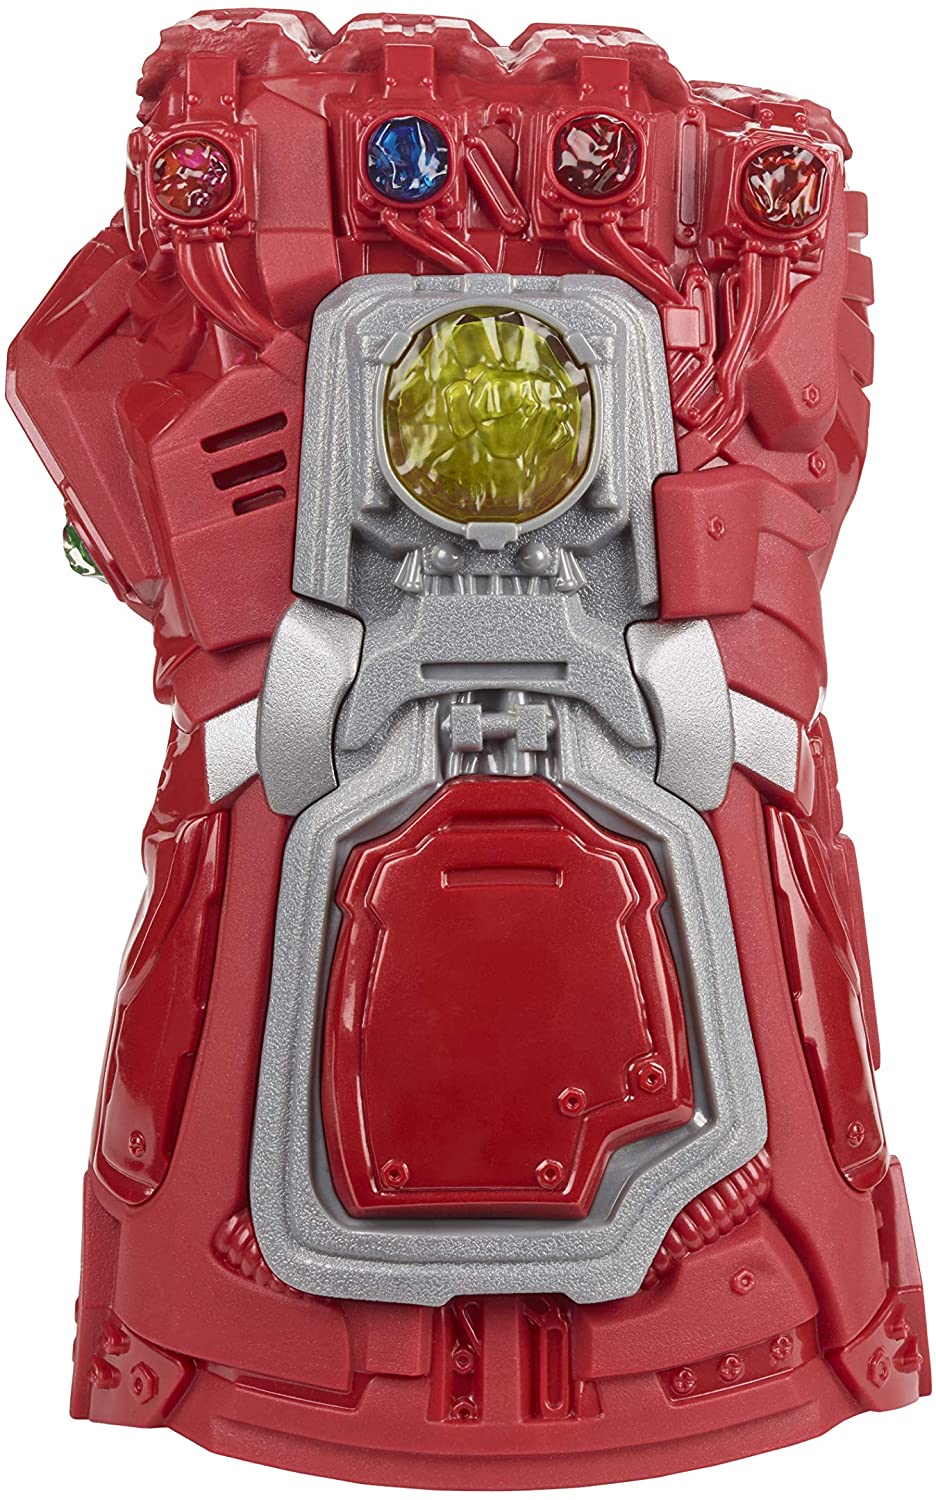 Avengers Marvel Endgame Red Infinity Gauntlet Electronic Fist Toy, Lights and Sounds $13.99 + Free Ship w/Prime